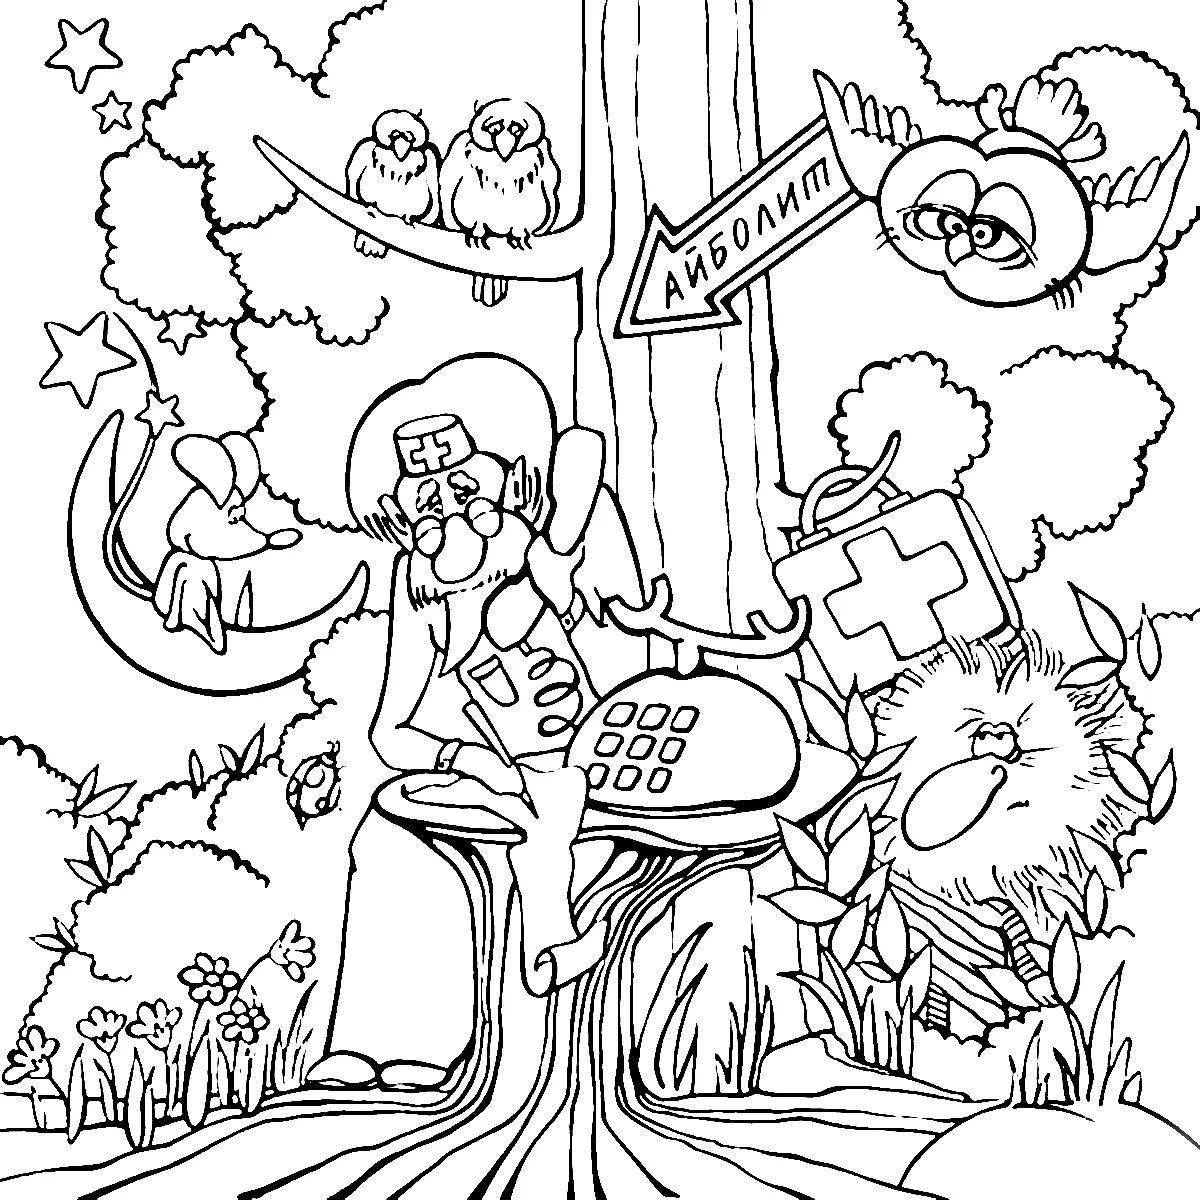 Exquisite miracle tree Chukovsky coloring book